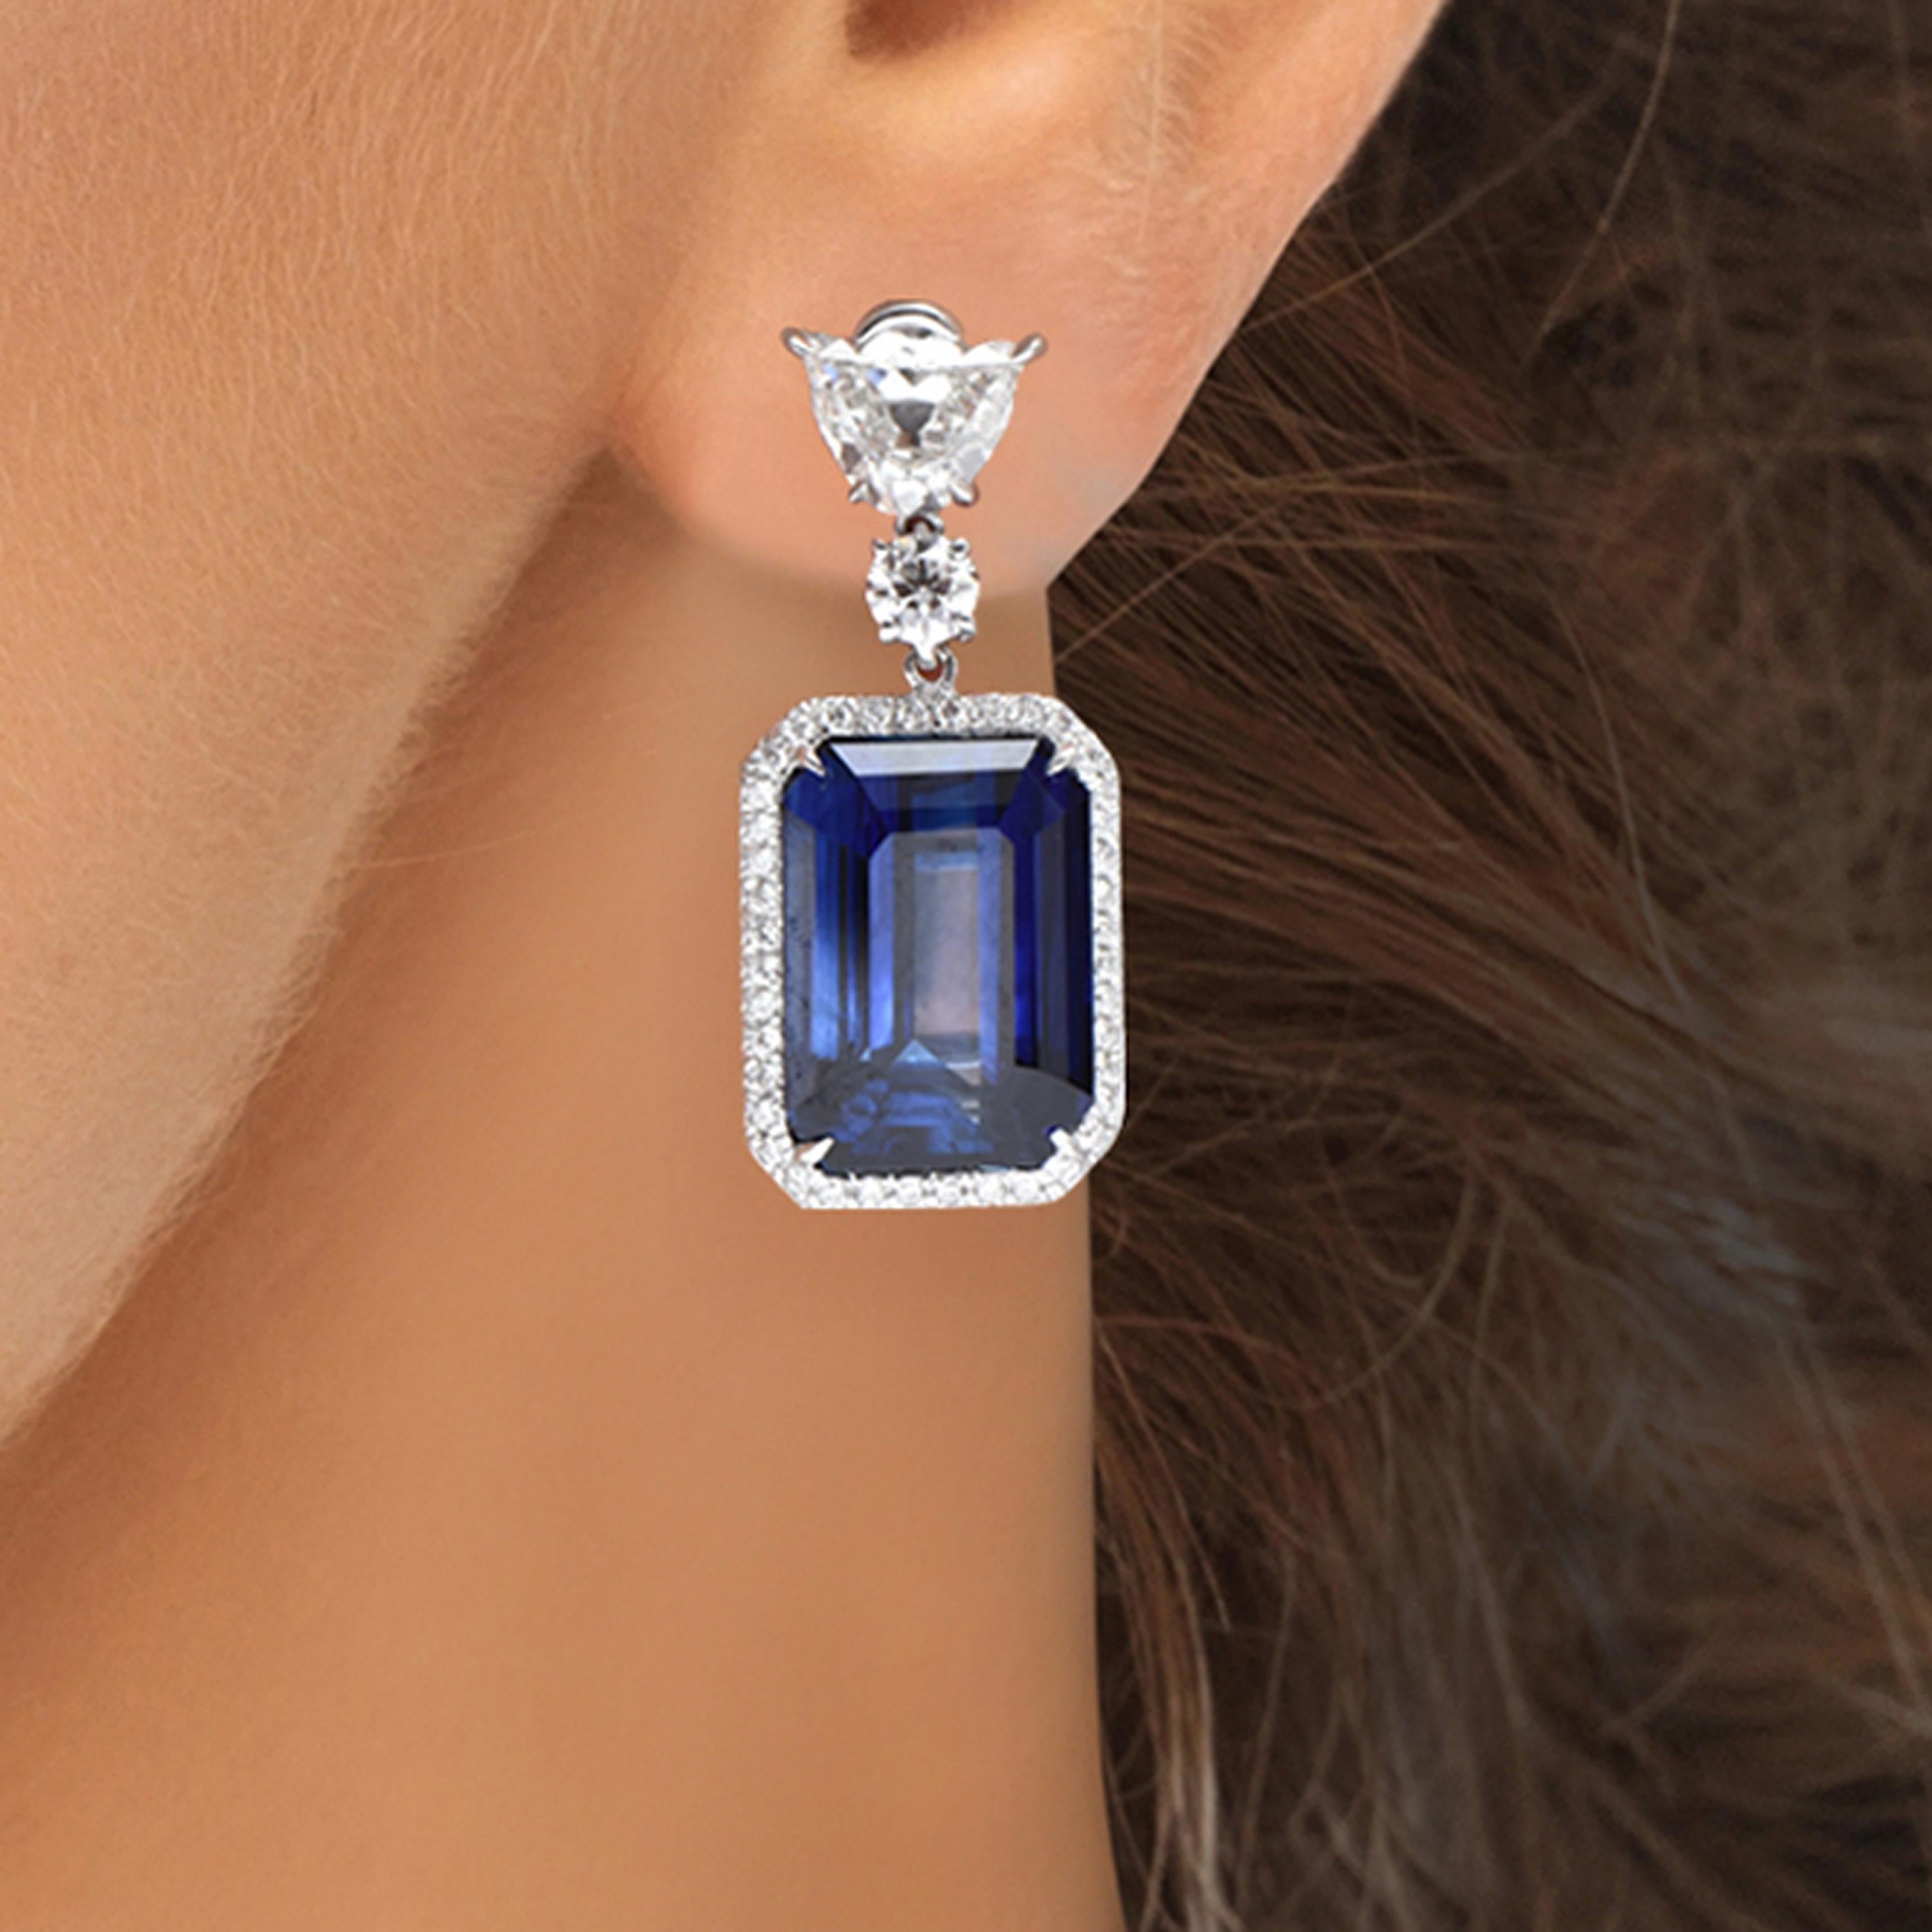 Modern Laviere 15.97 Carat Blue Sapphire and Diamond Earrings For Sale